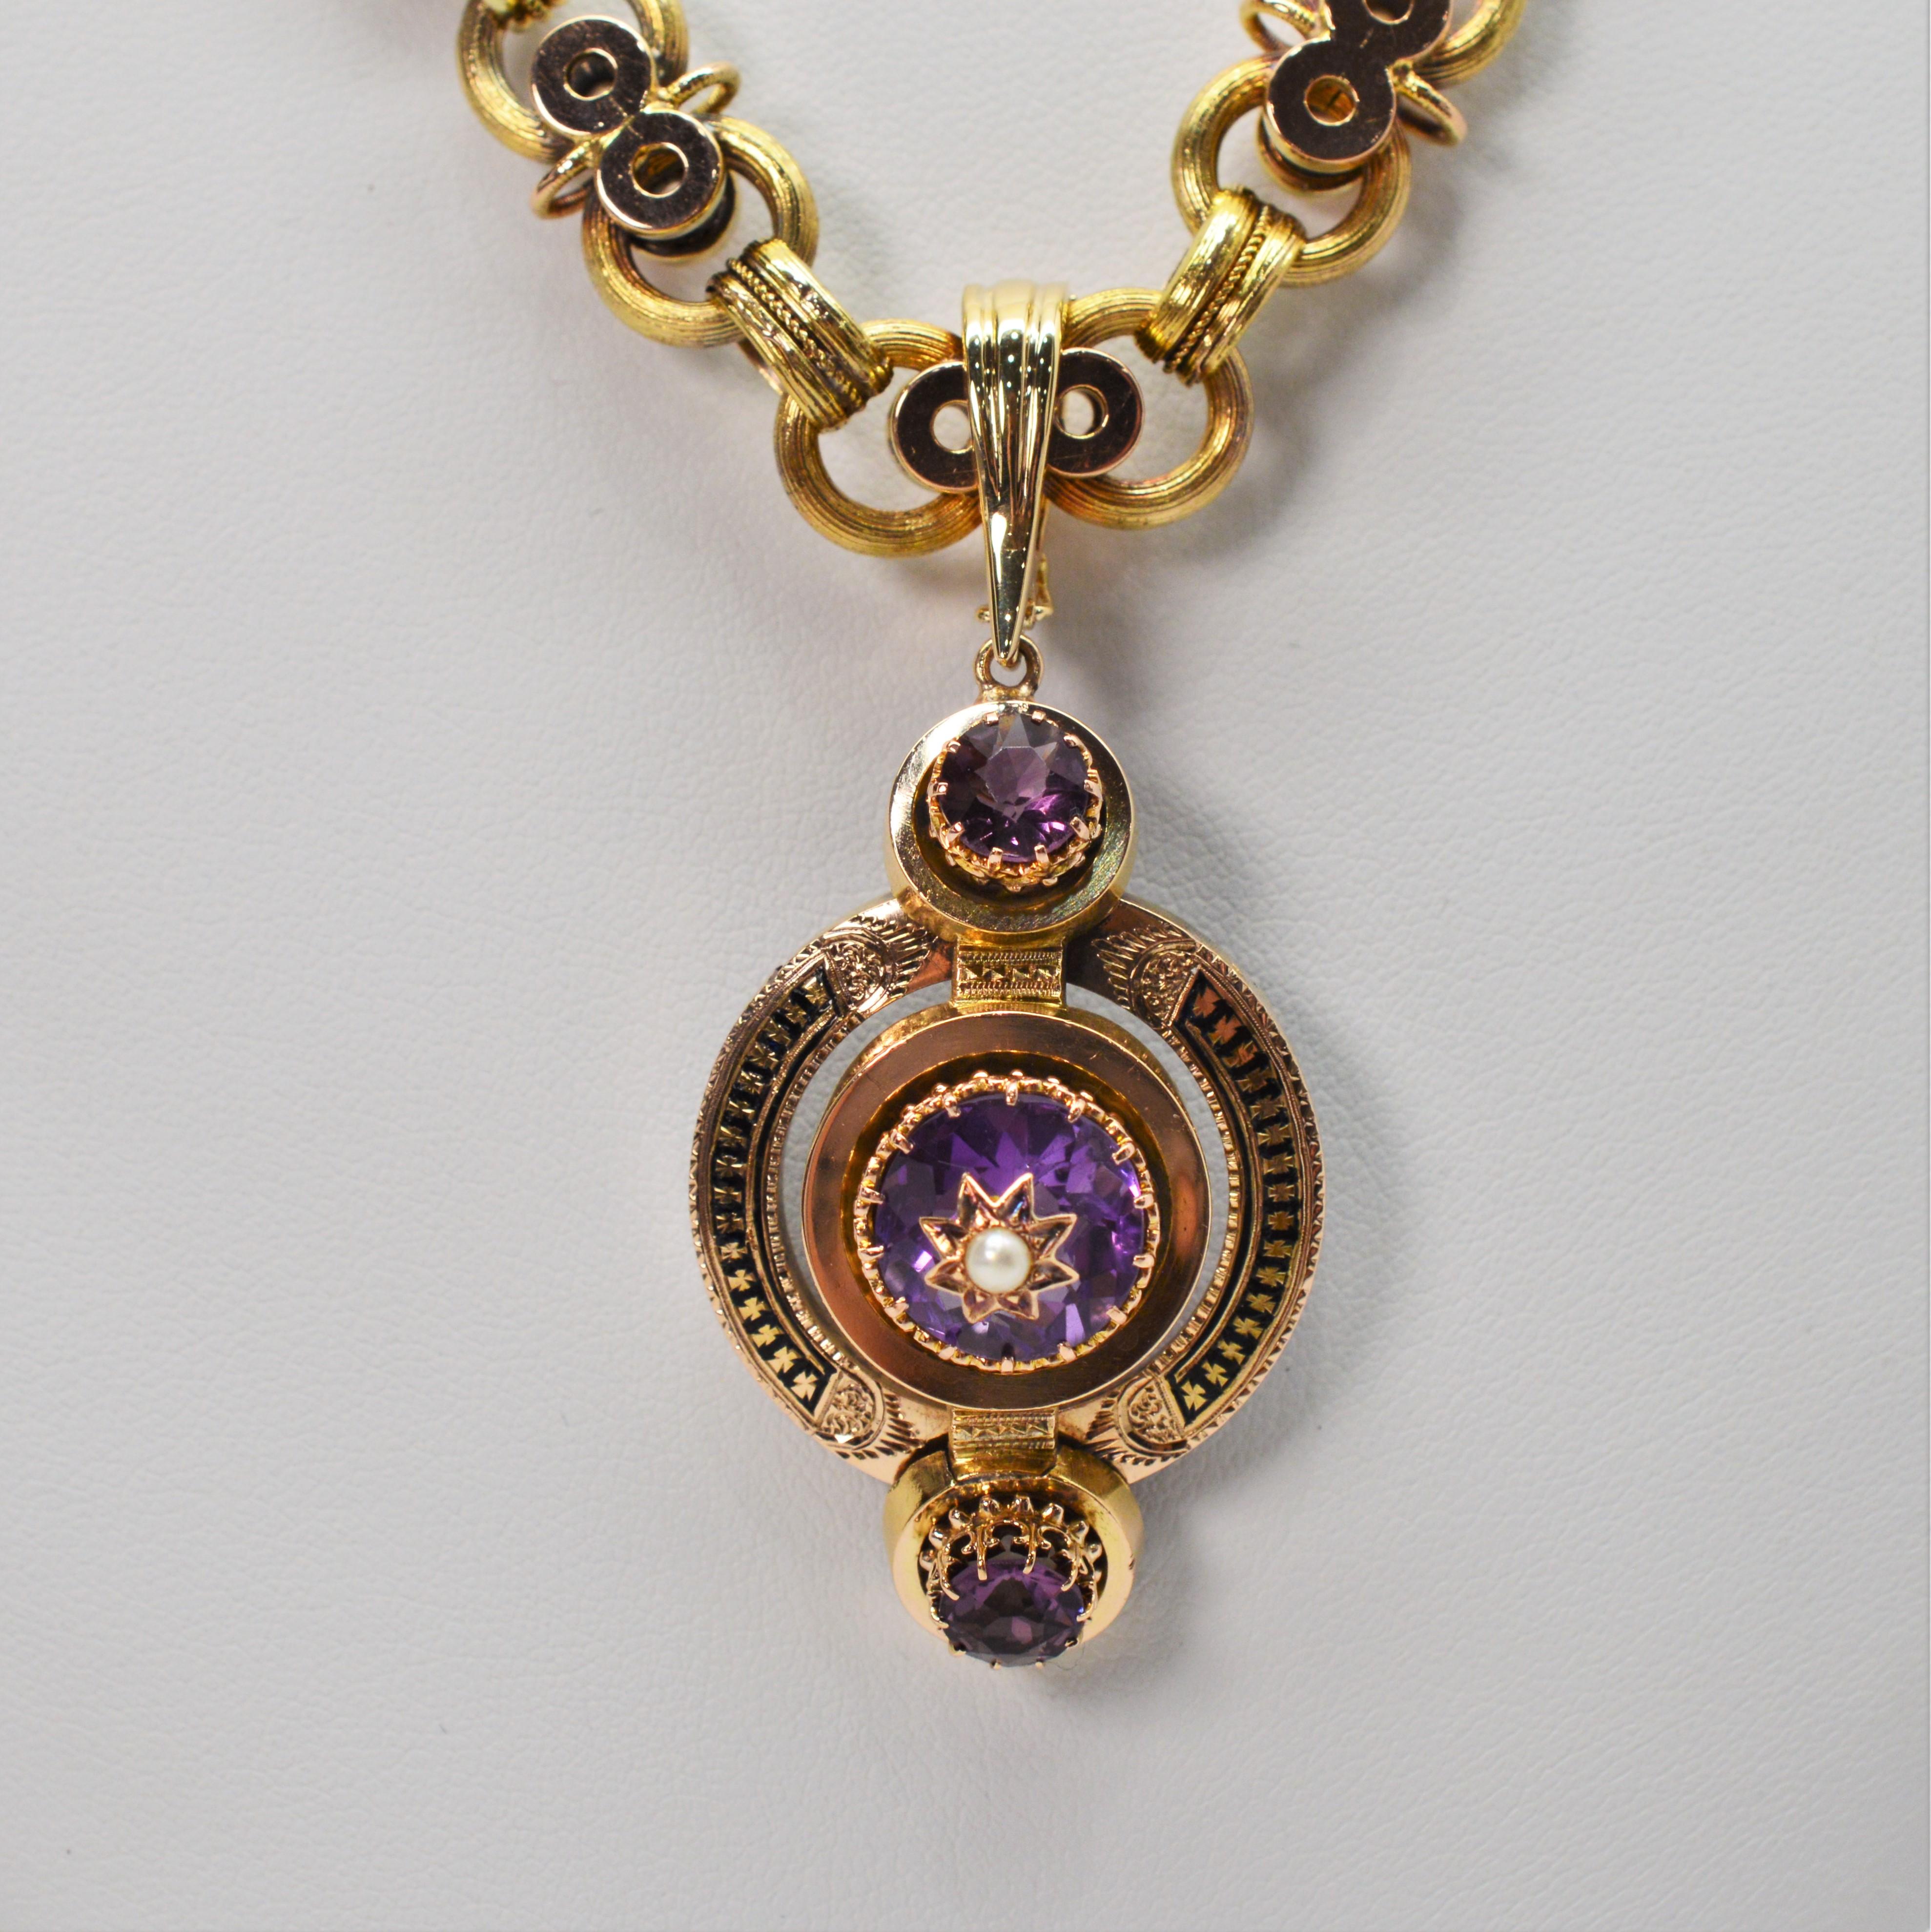 Uniquely intricate necklace of antique chain in fourteen carat 14K yellow gold carry this regal charm pendant enhancer with over eight carats of deep purple amethyst gemstone The removable medallion shaped enhancer measures 1-1/2 by 1 inch and